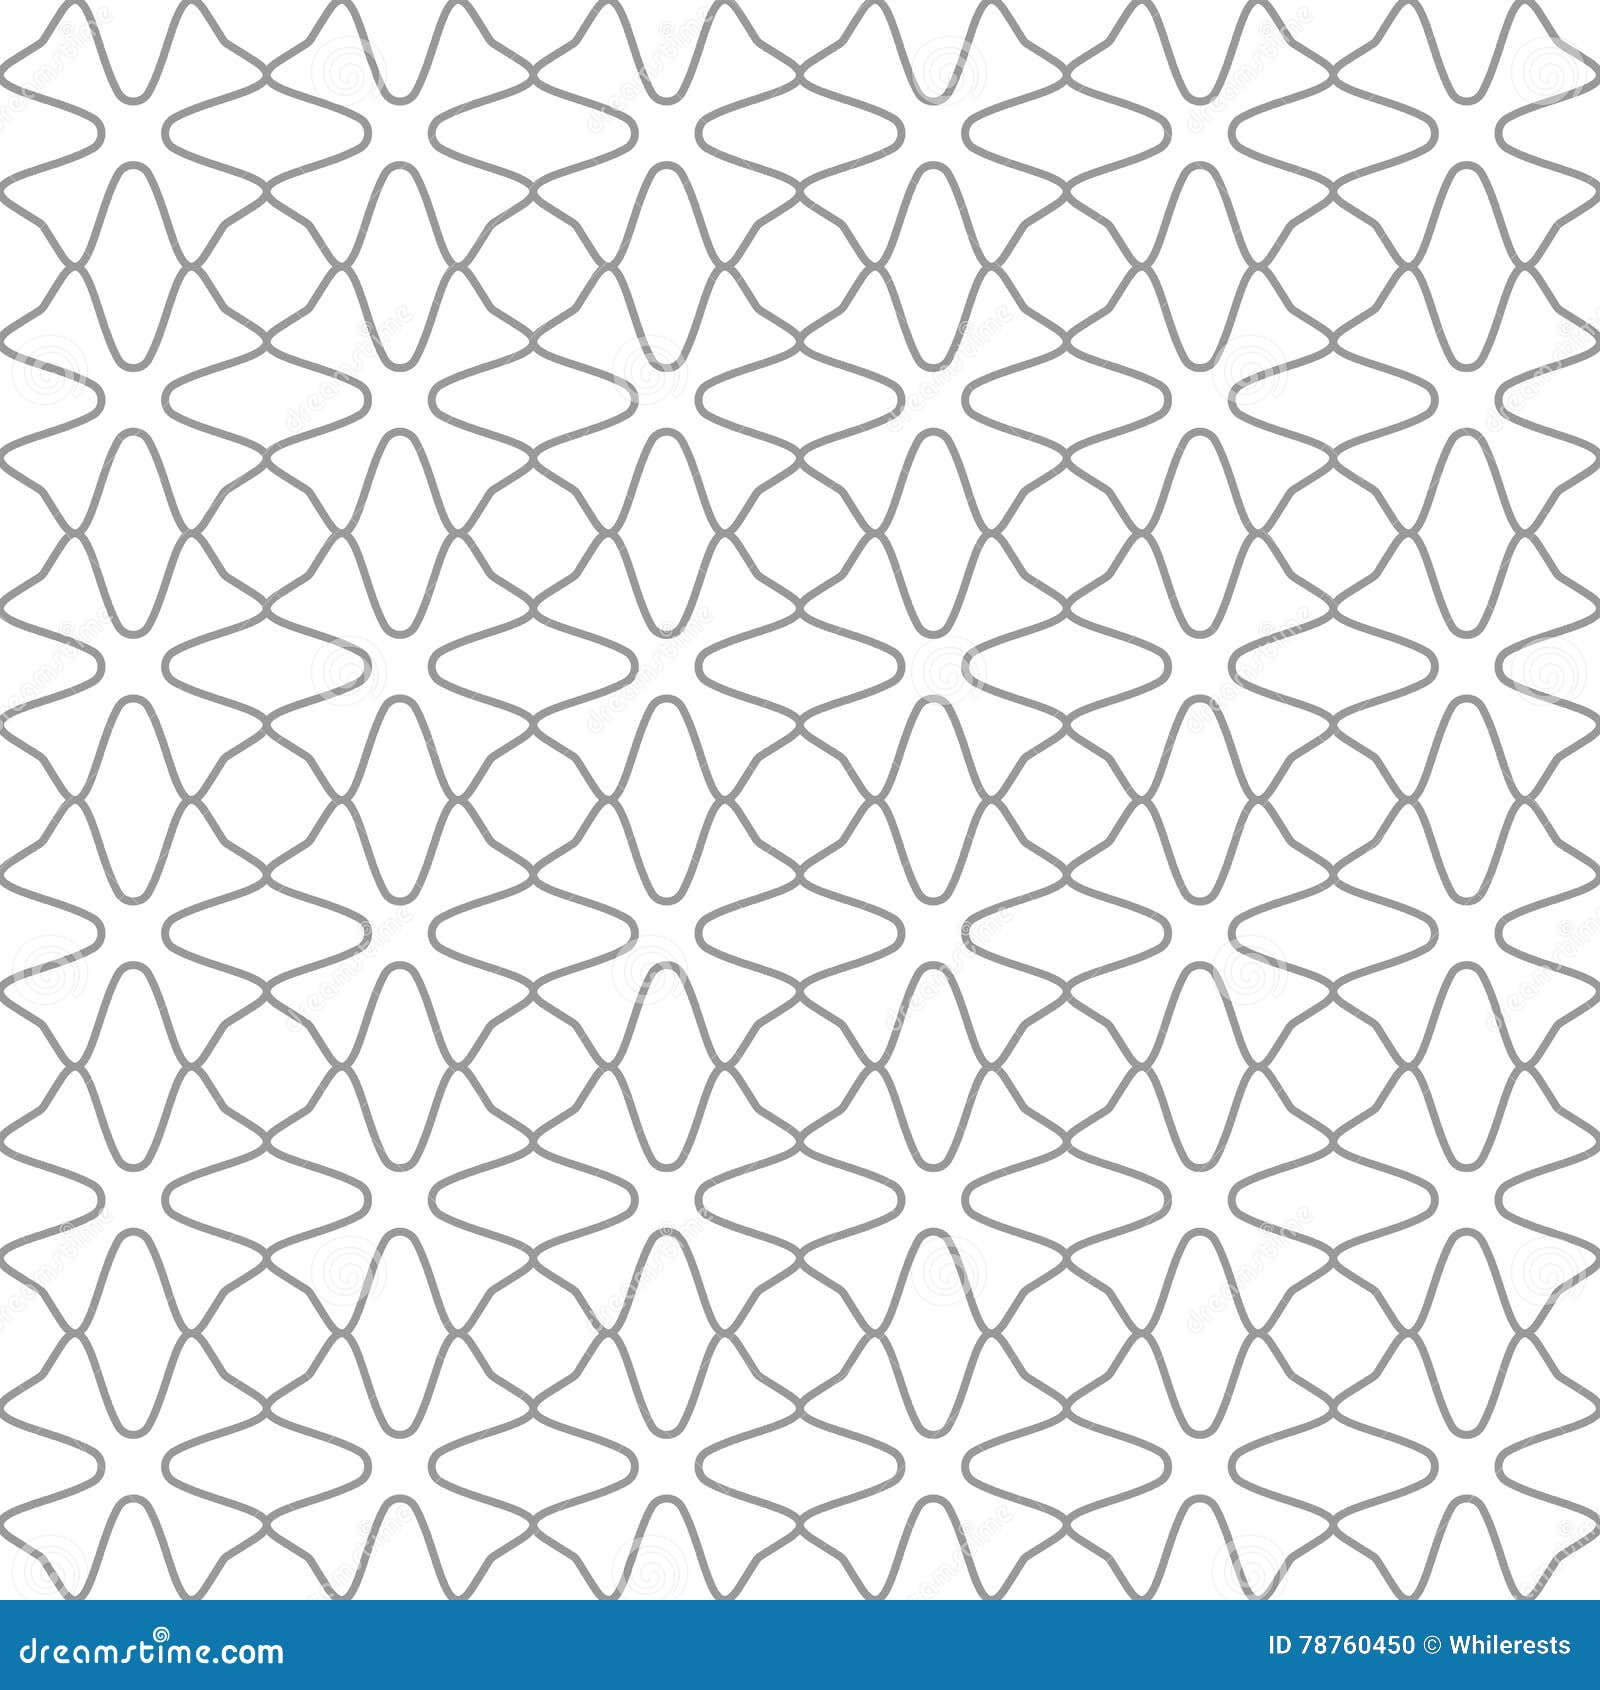 Seamless Geometric Patterns Set. Grey and White Texture for Your Design ...